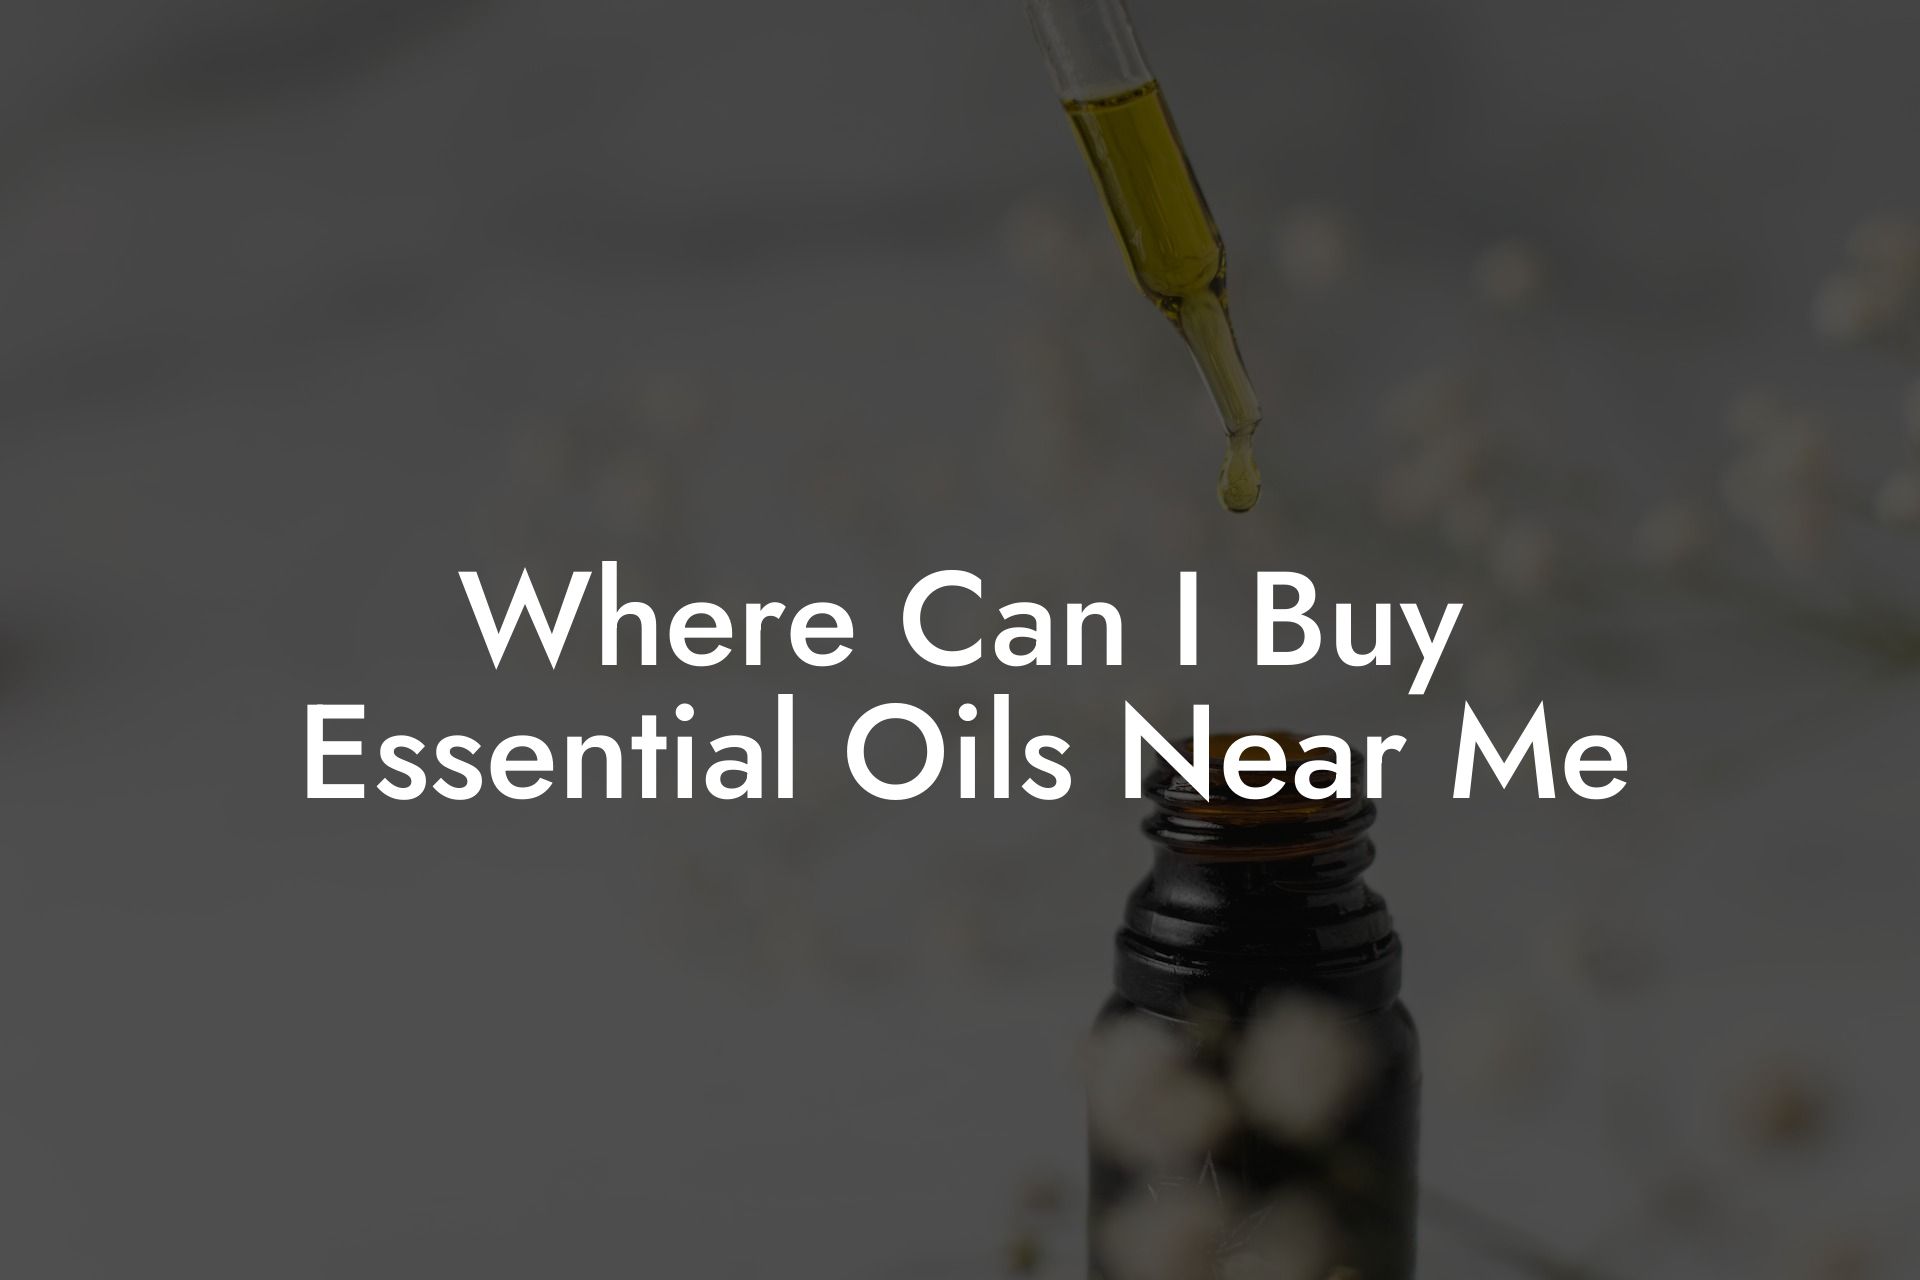 Where Can I Buy Essential Oils Near Me